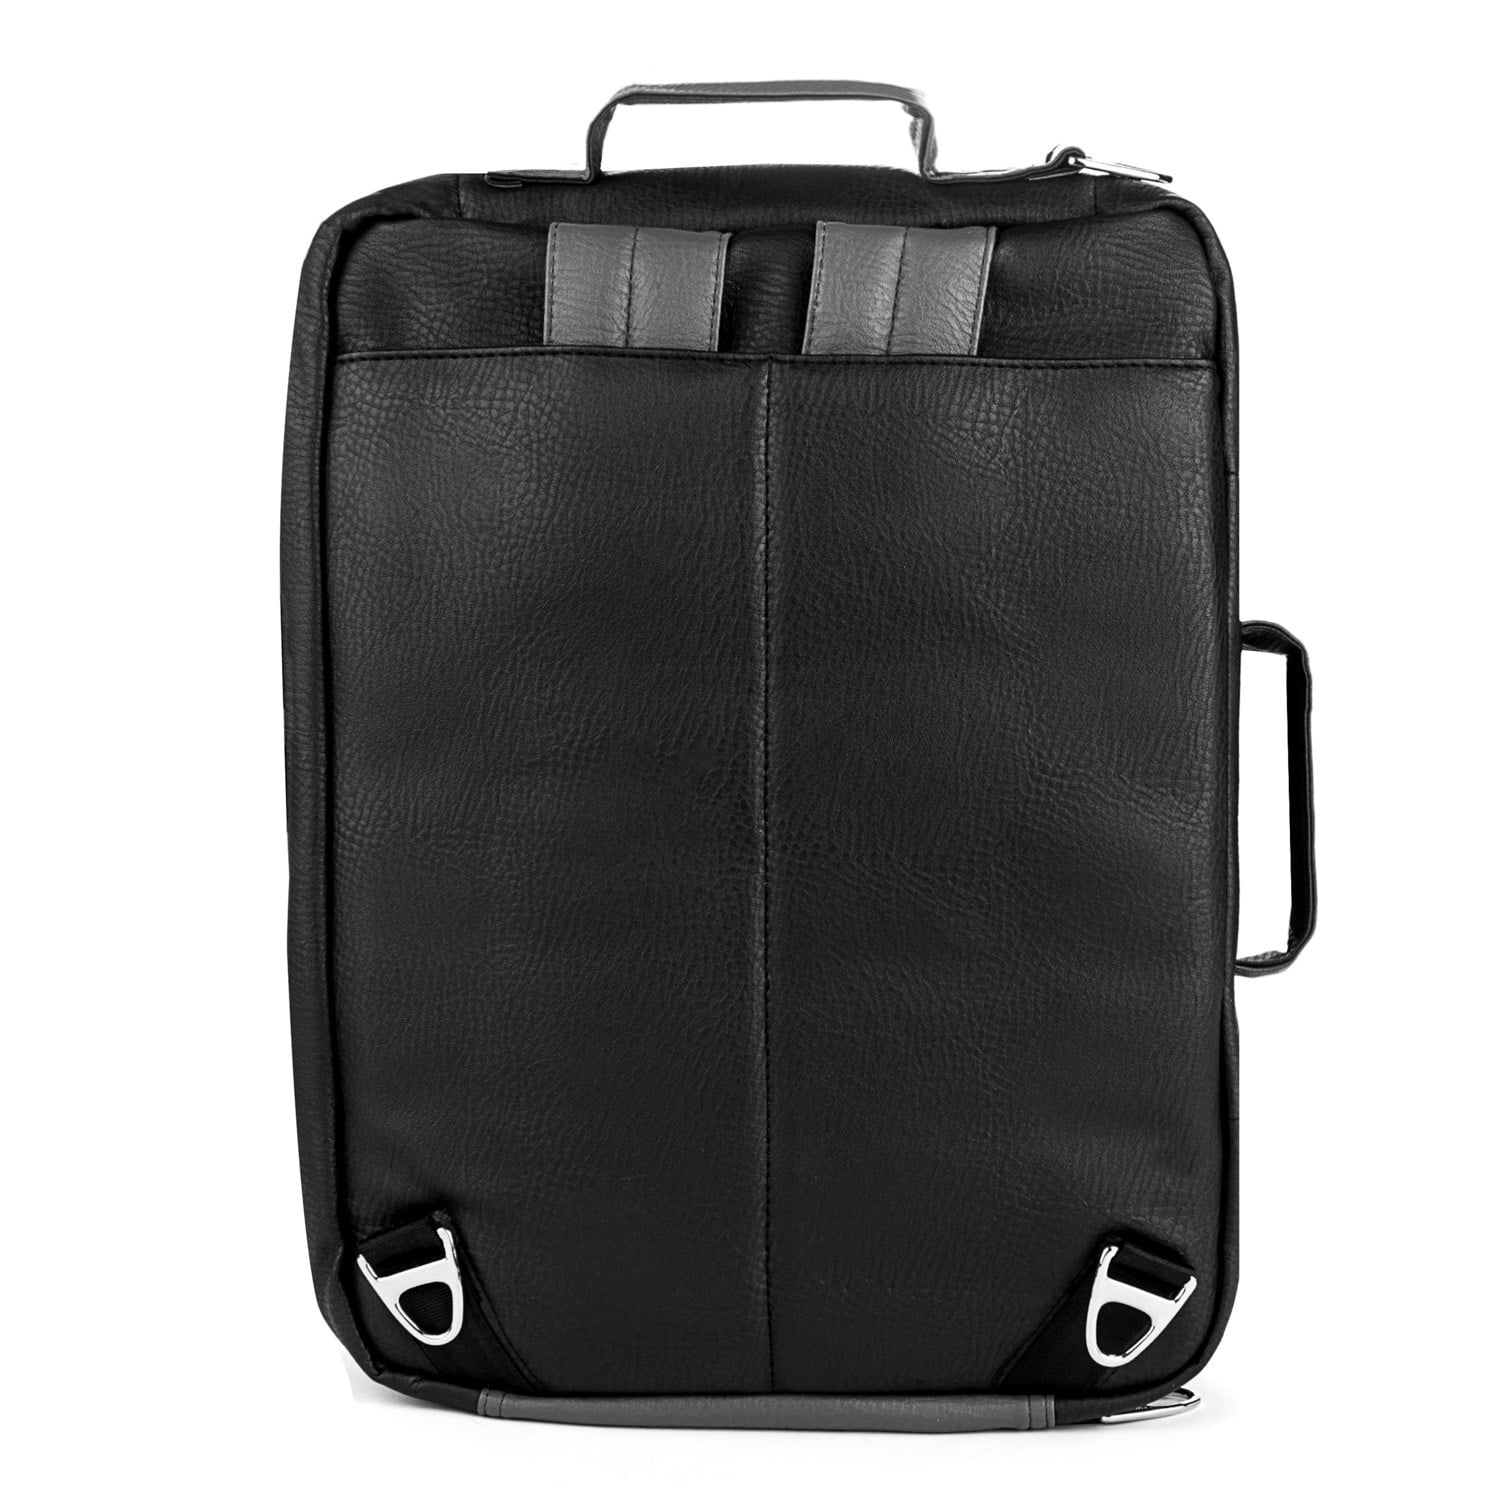 Vangoddy Adlers Backpack 13in to 15.6in Laptop Tablets Fits Acer Aspire 15 13 A